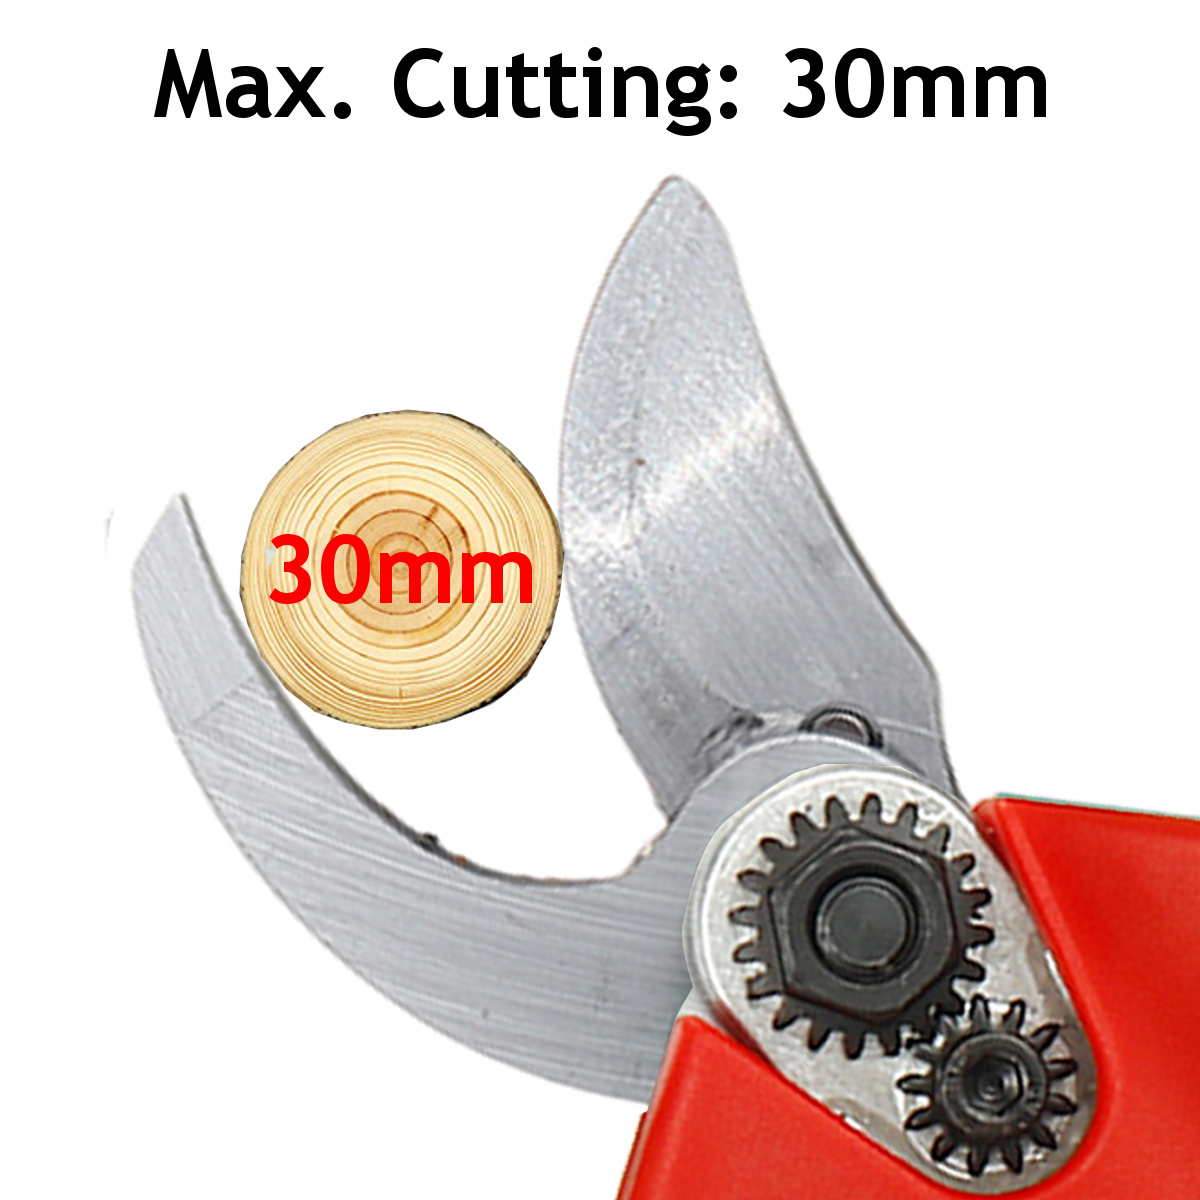 30mm-Cordless-Electric-Pruning-Shears-Liion-Battery-Leaves-Trimmer-Garden-Power-Tool-Fit-Makita-1885465-8